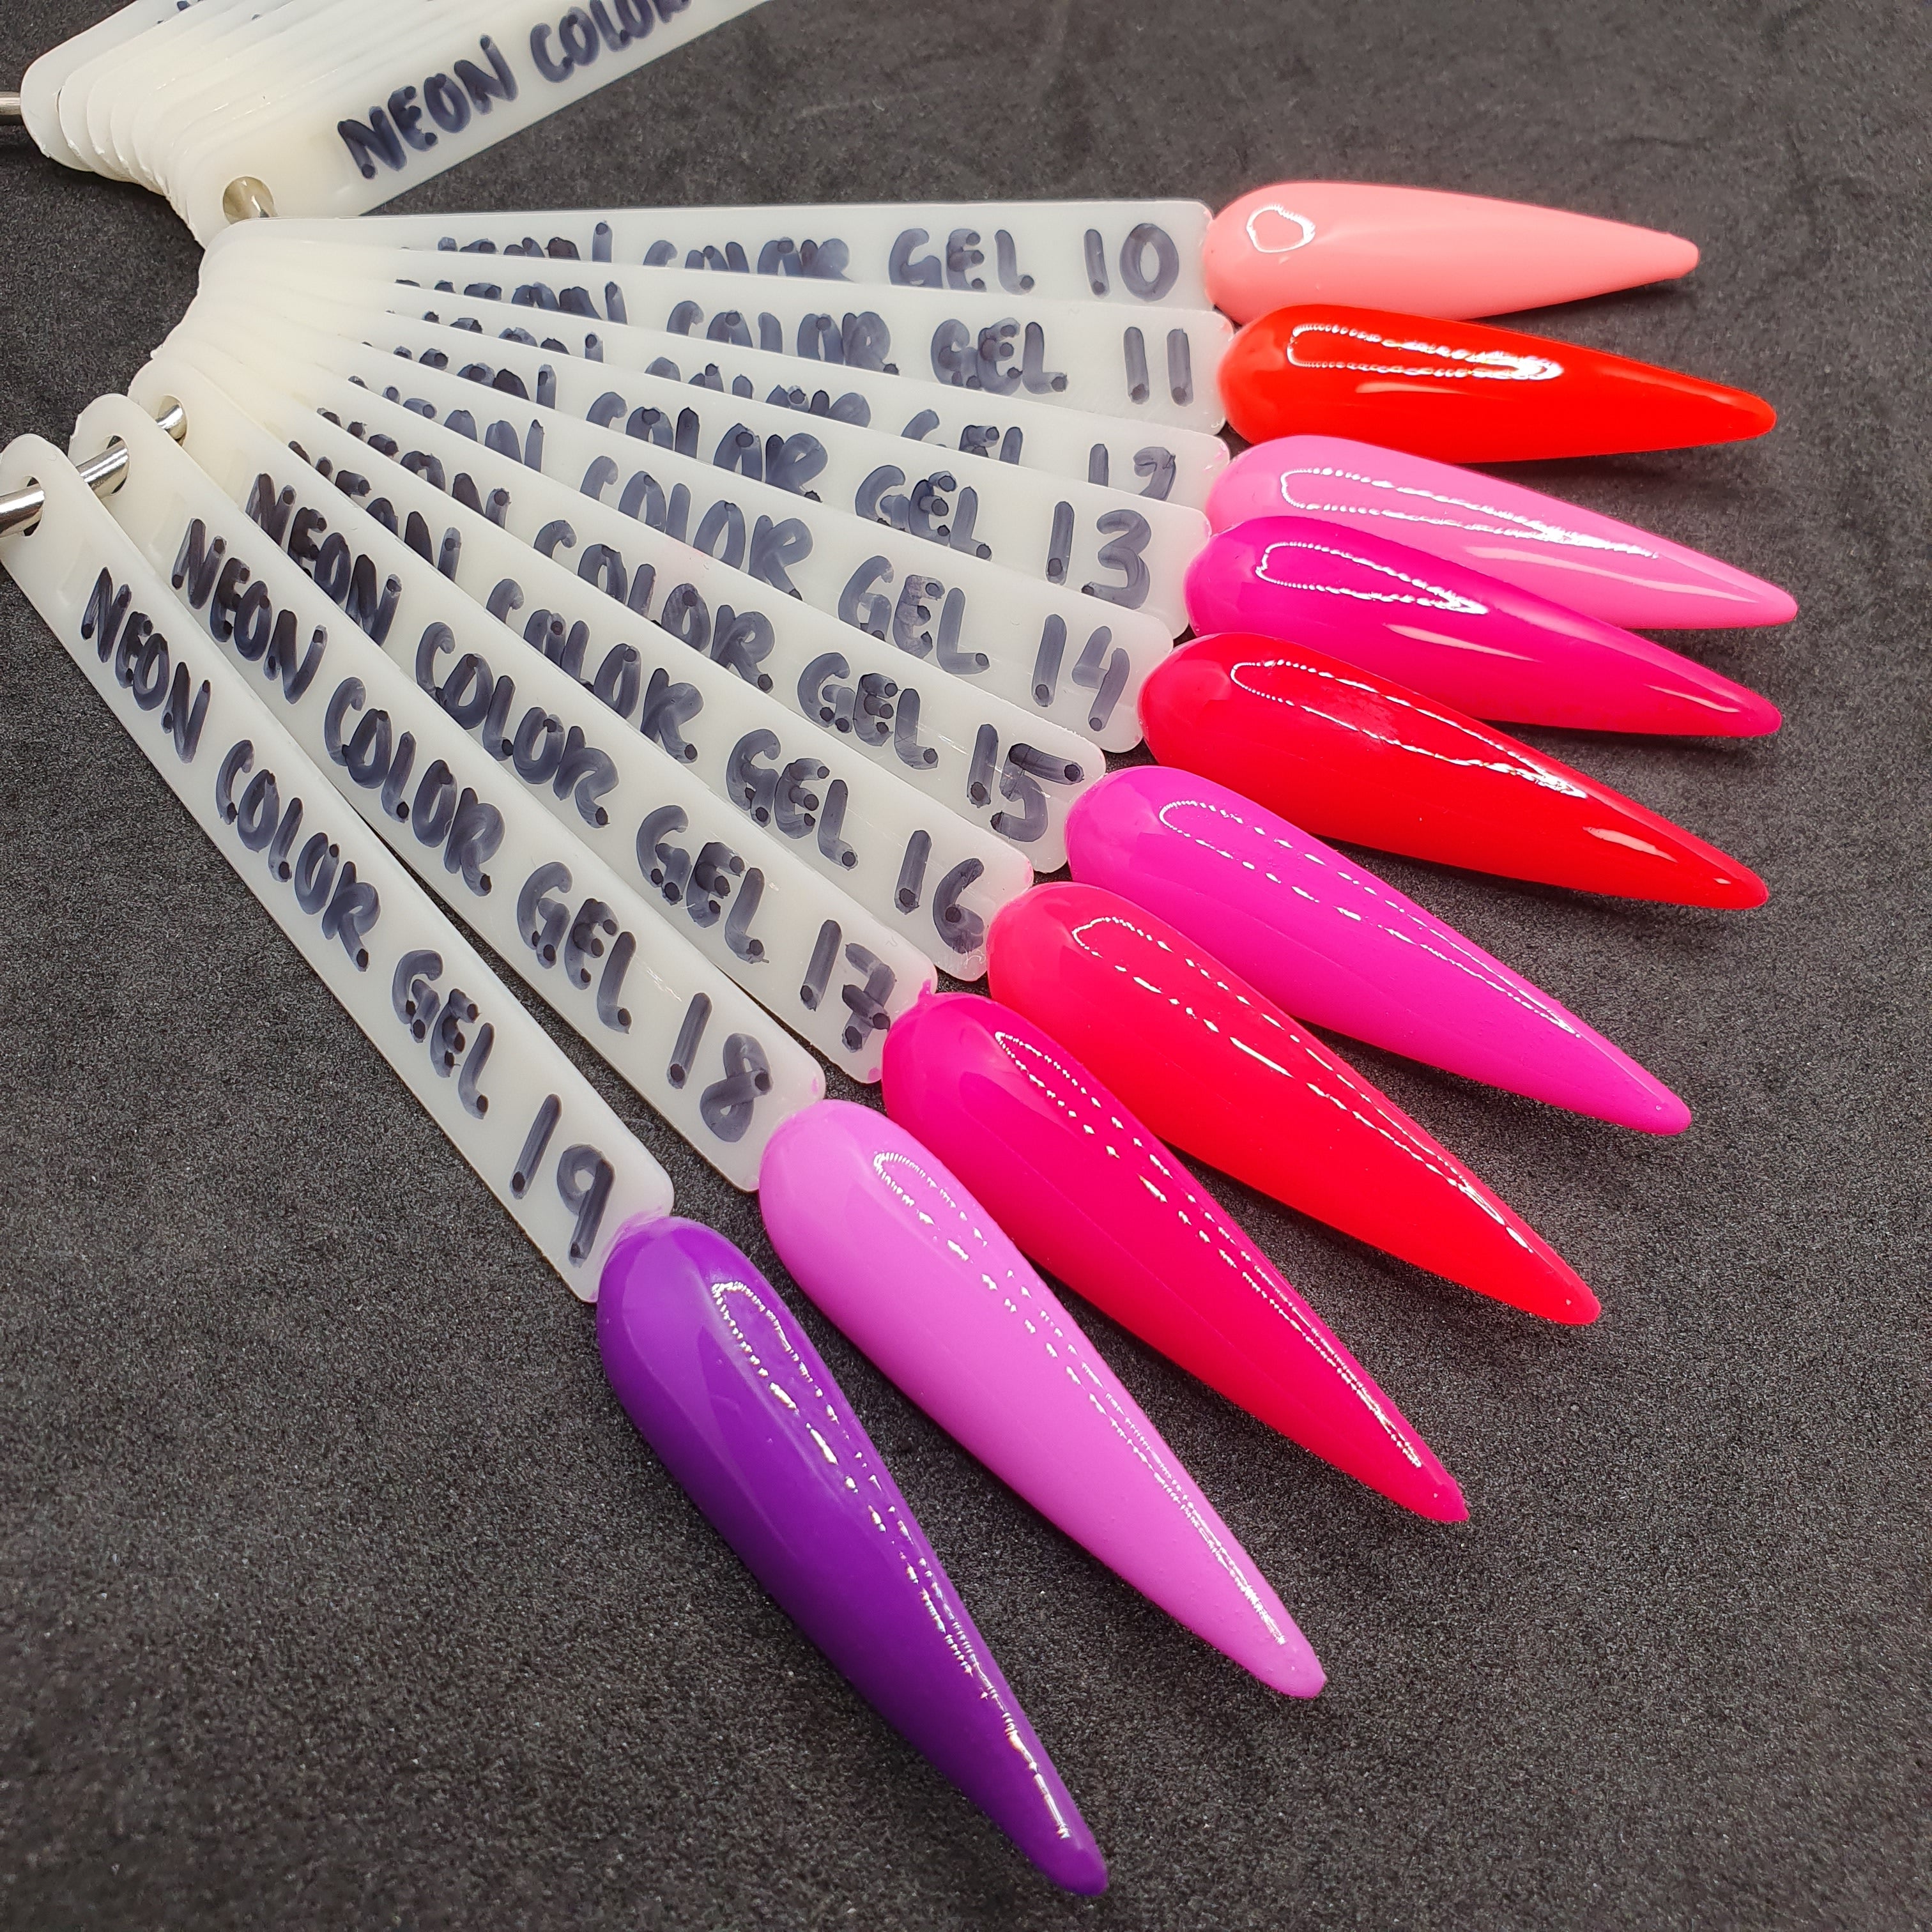 NEW - GND NEON GEL COLOR - 04